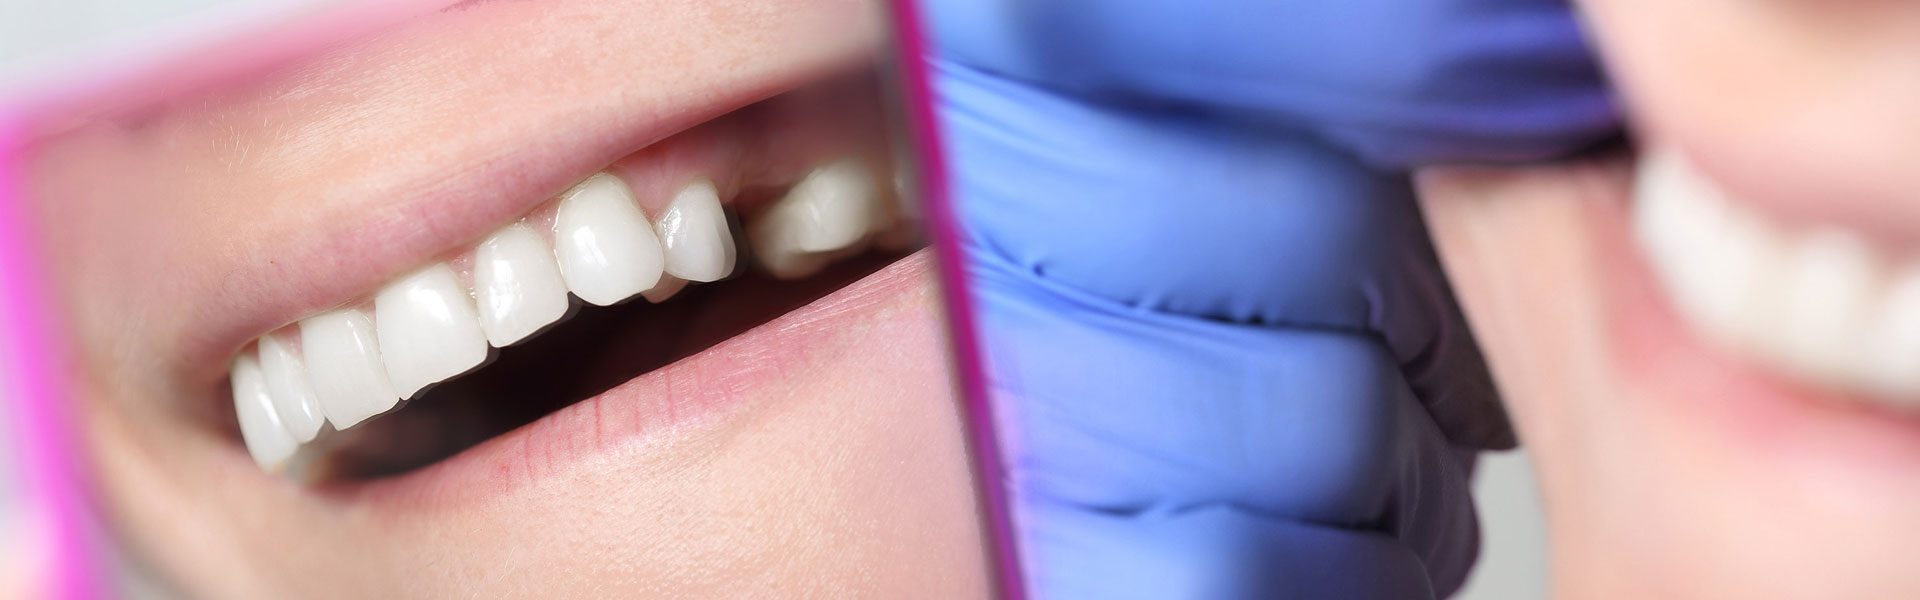 A Missing Tooth Makes it Hard to Smile. Restore Your Smile with a Dental Bridge!